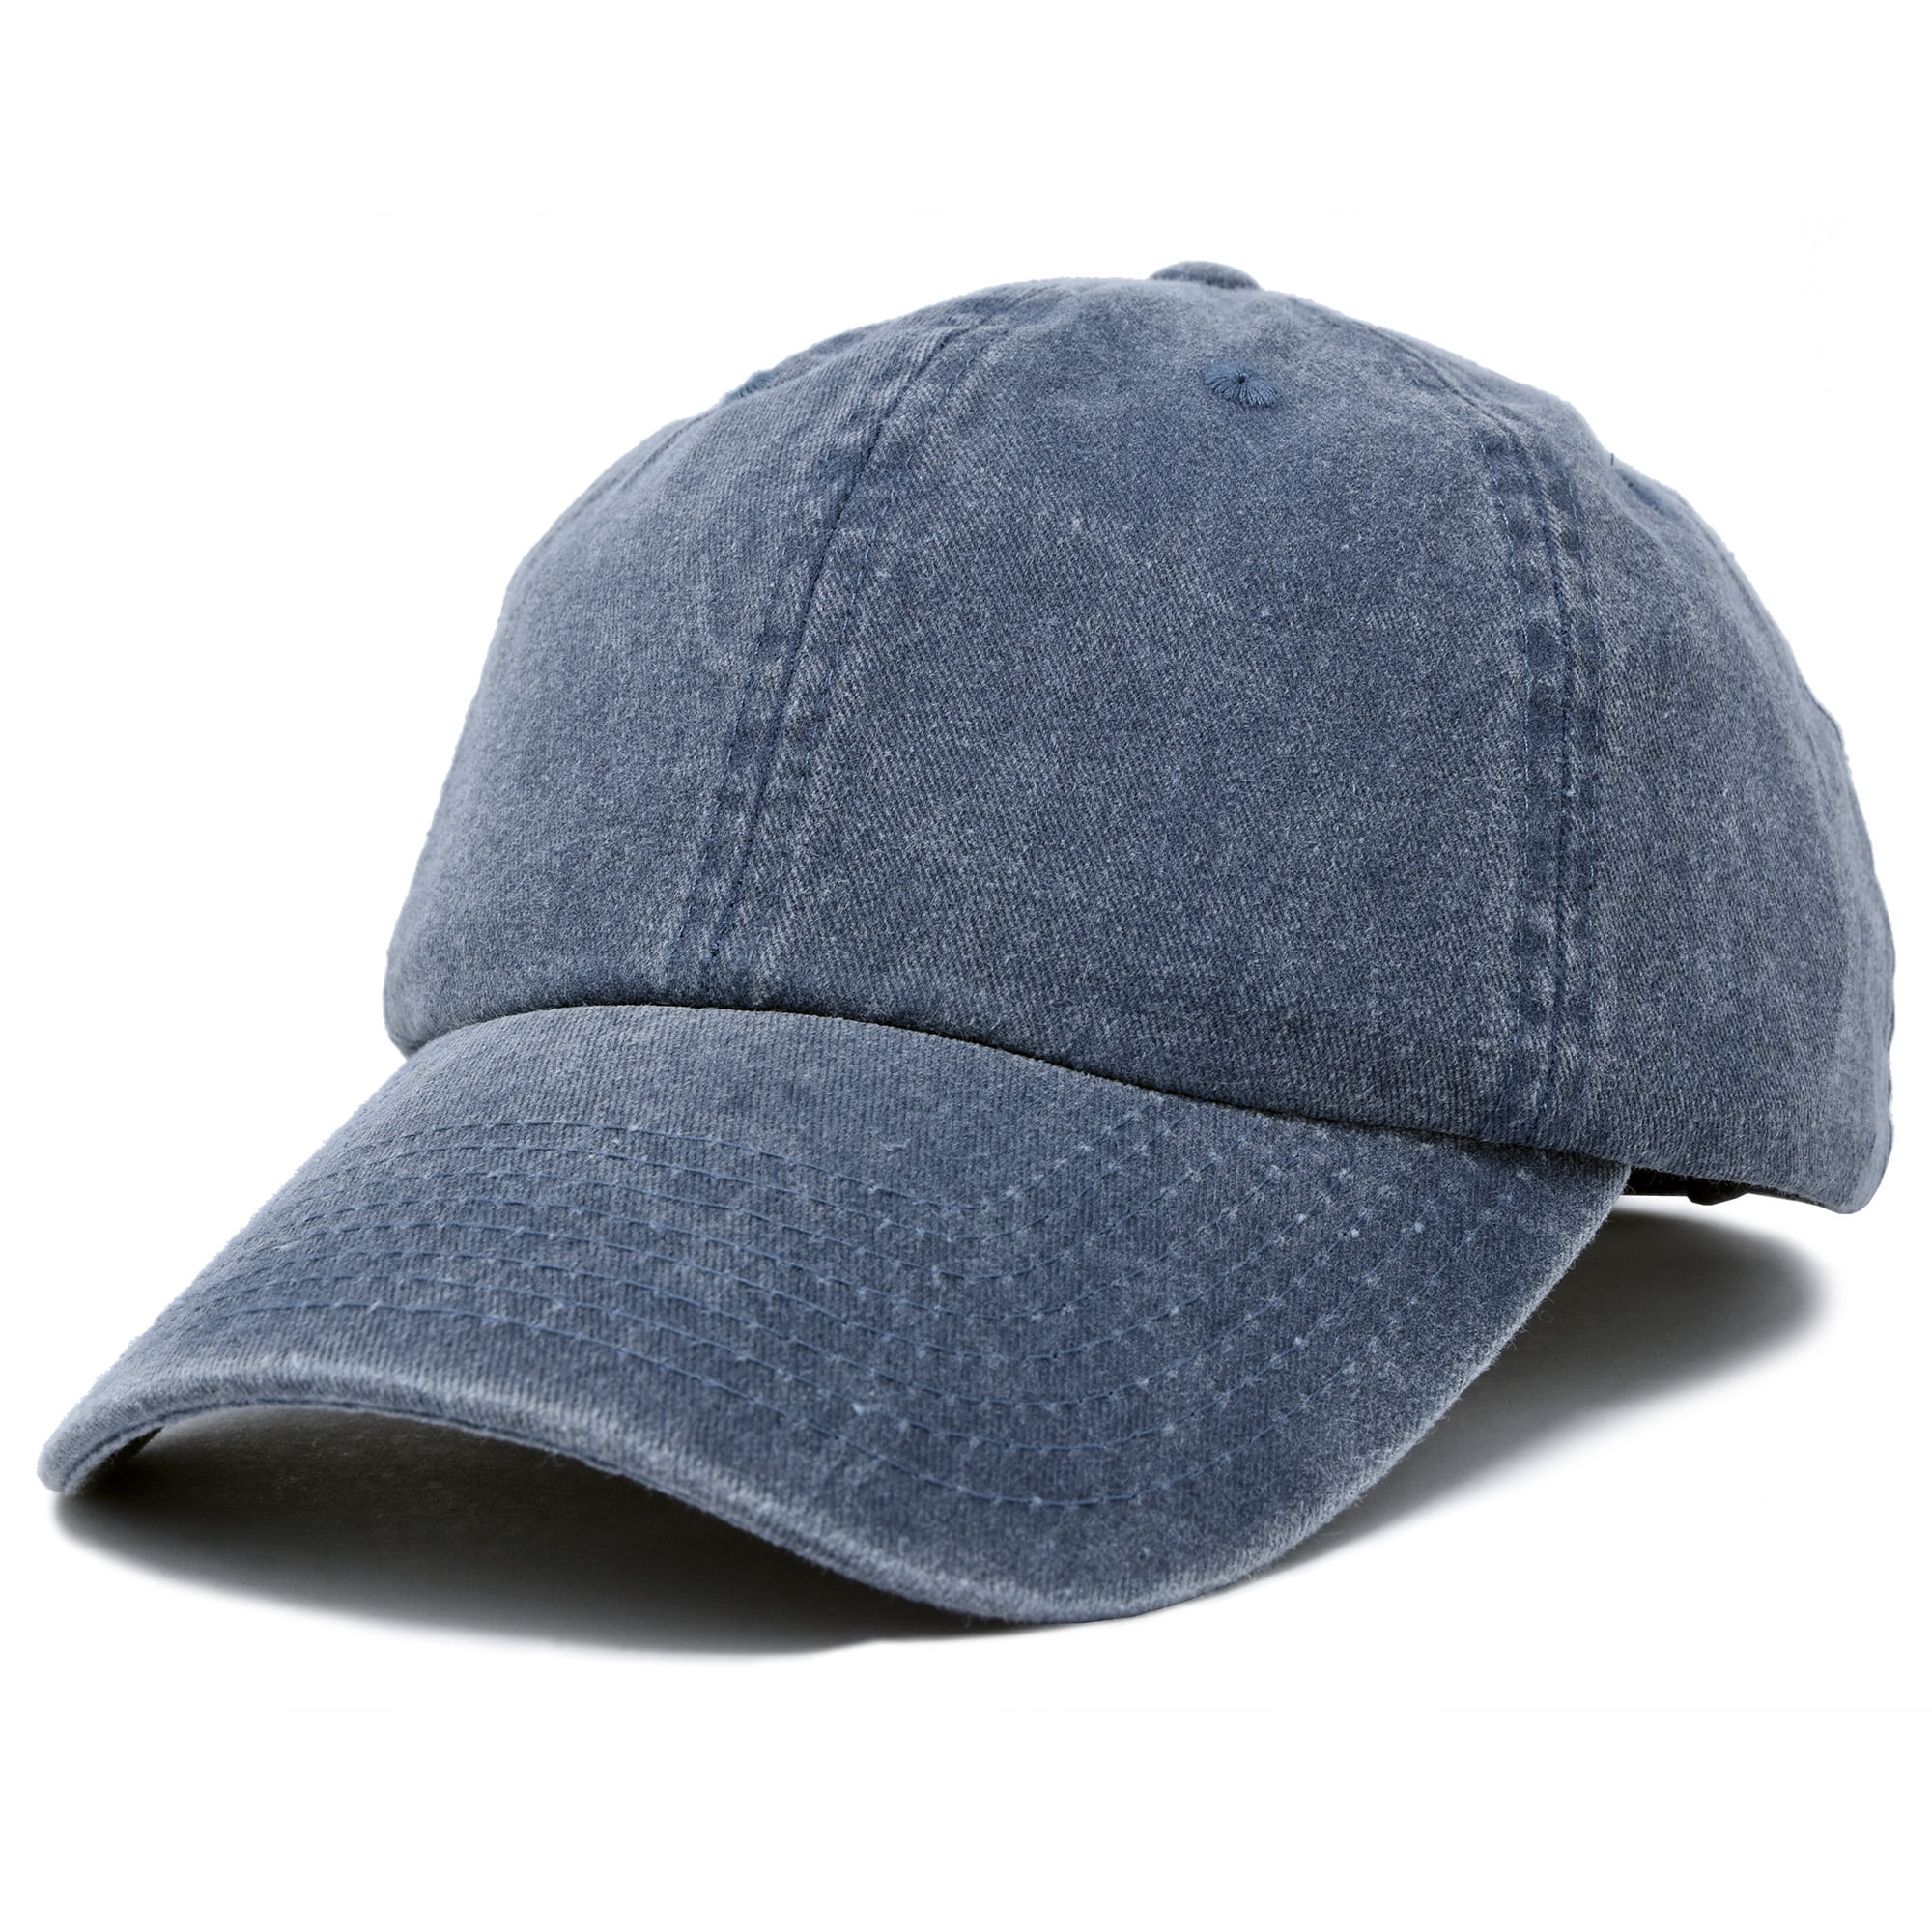 DALIX Pigment Dyed Hat Heavy Washed Cotton Baseball Cap in Navy Blue